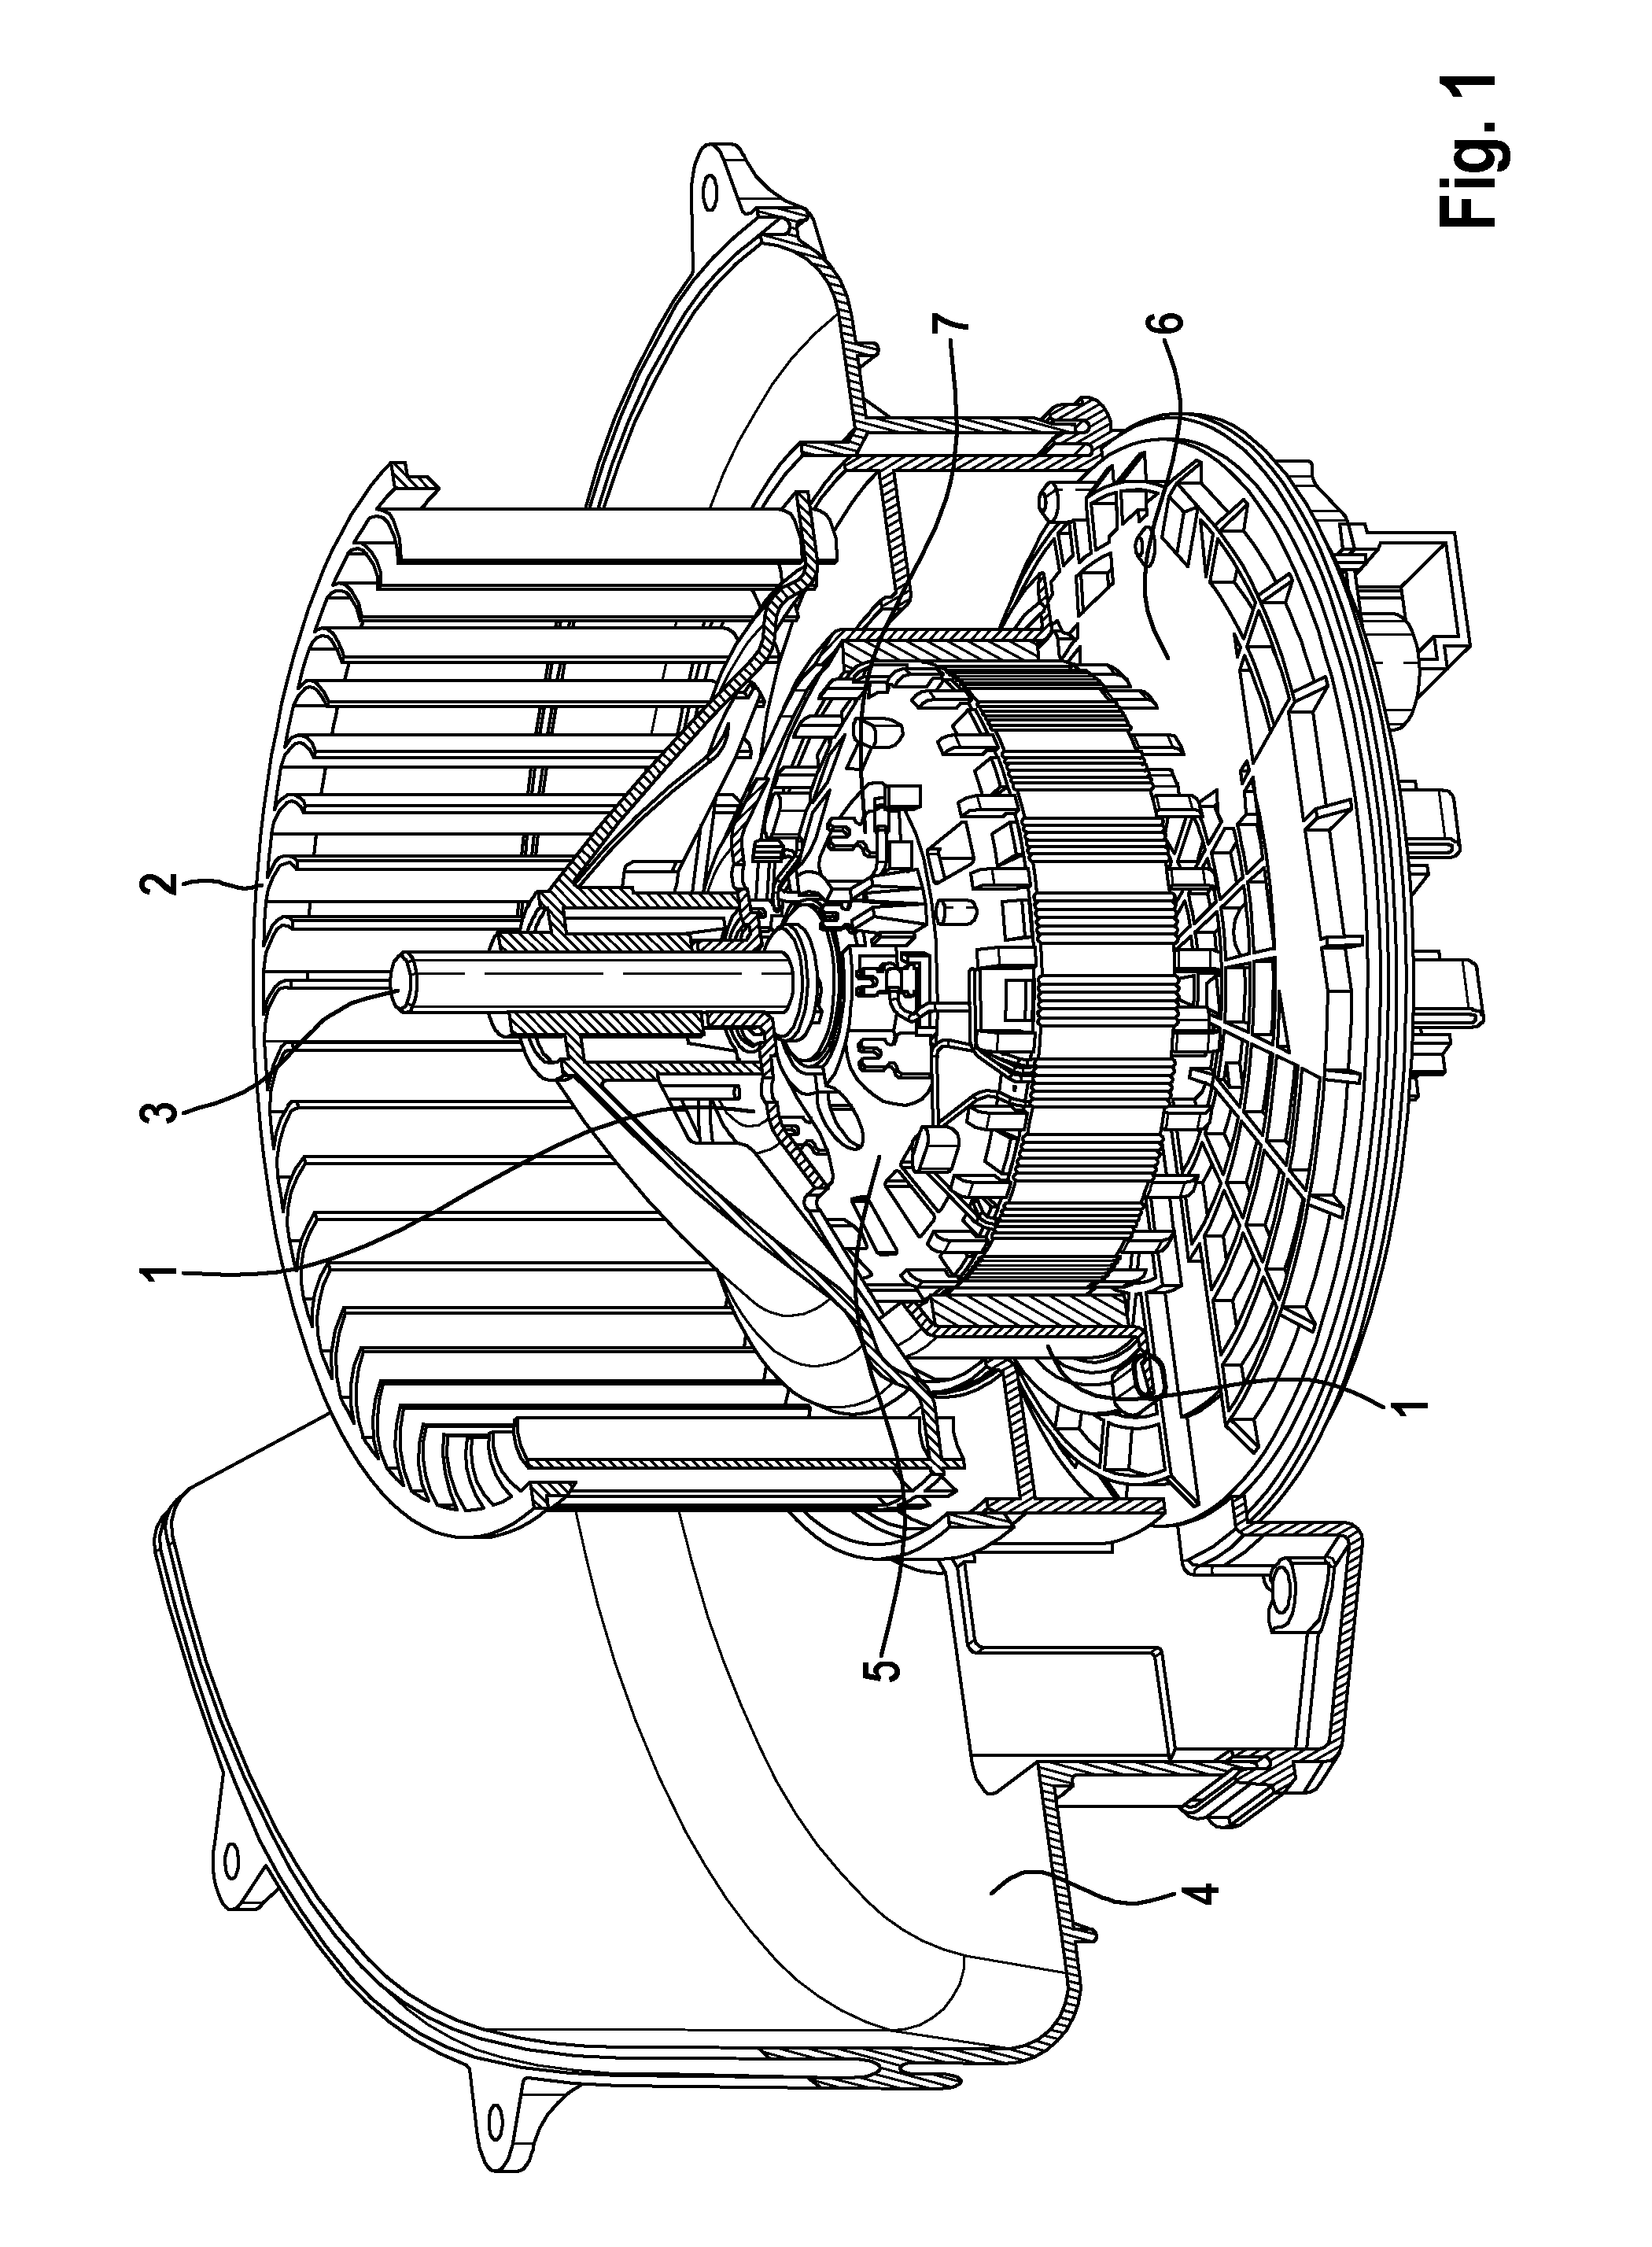 Electronically commutated DC motor with shielding